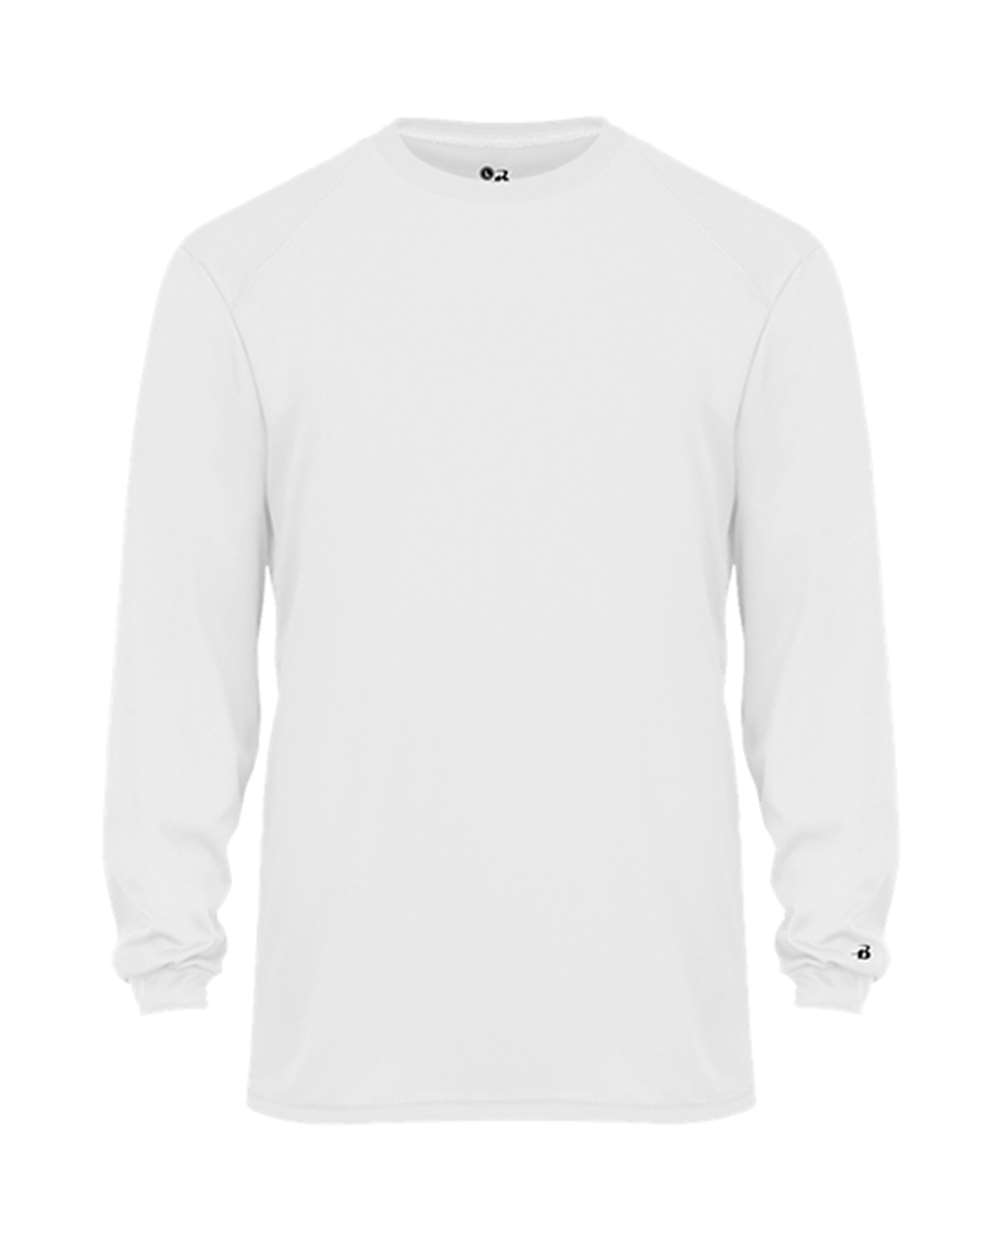 Badger 2944 - Youth Triblend Long Sleeve T-Shirt